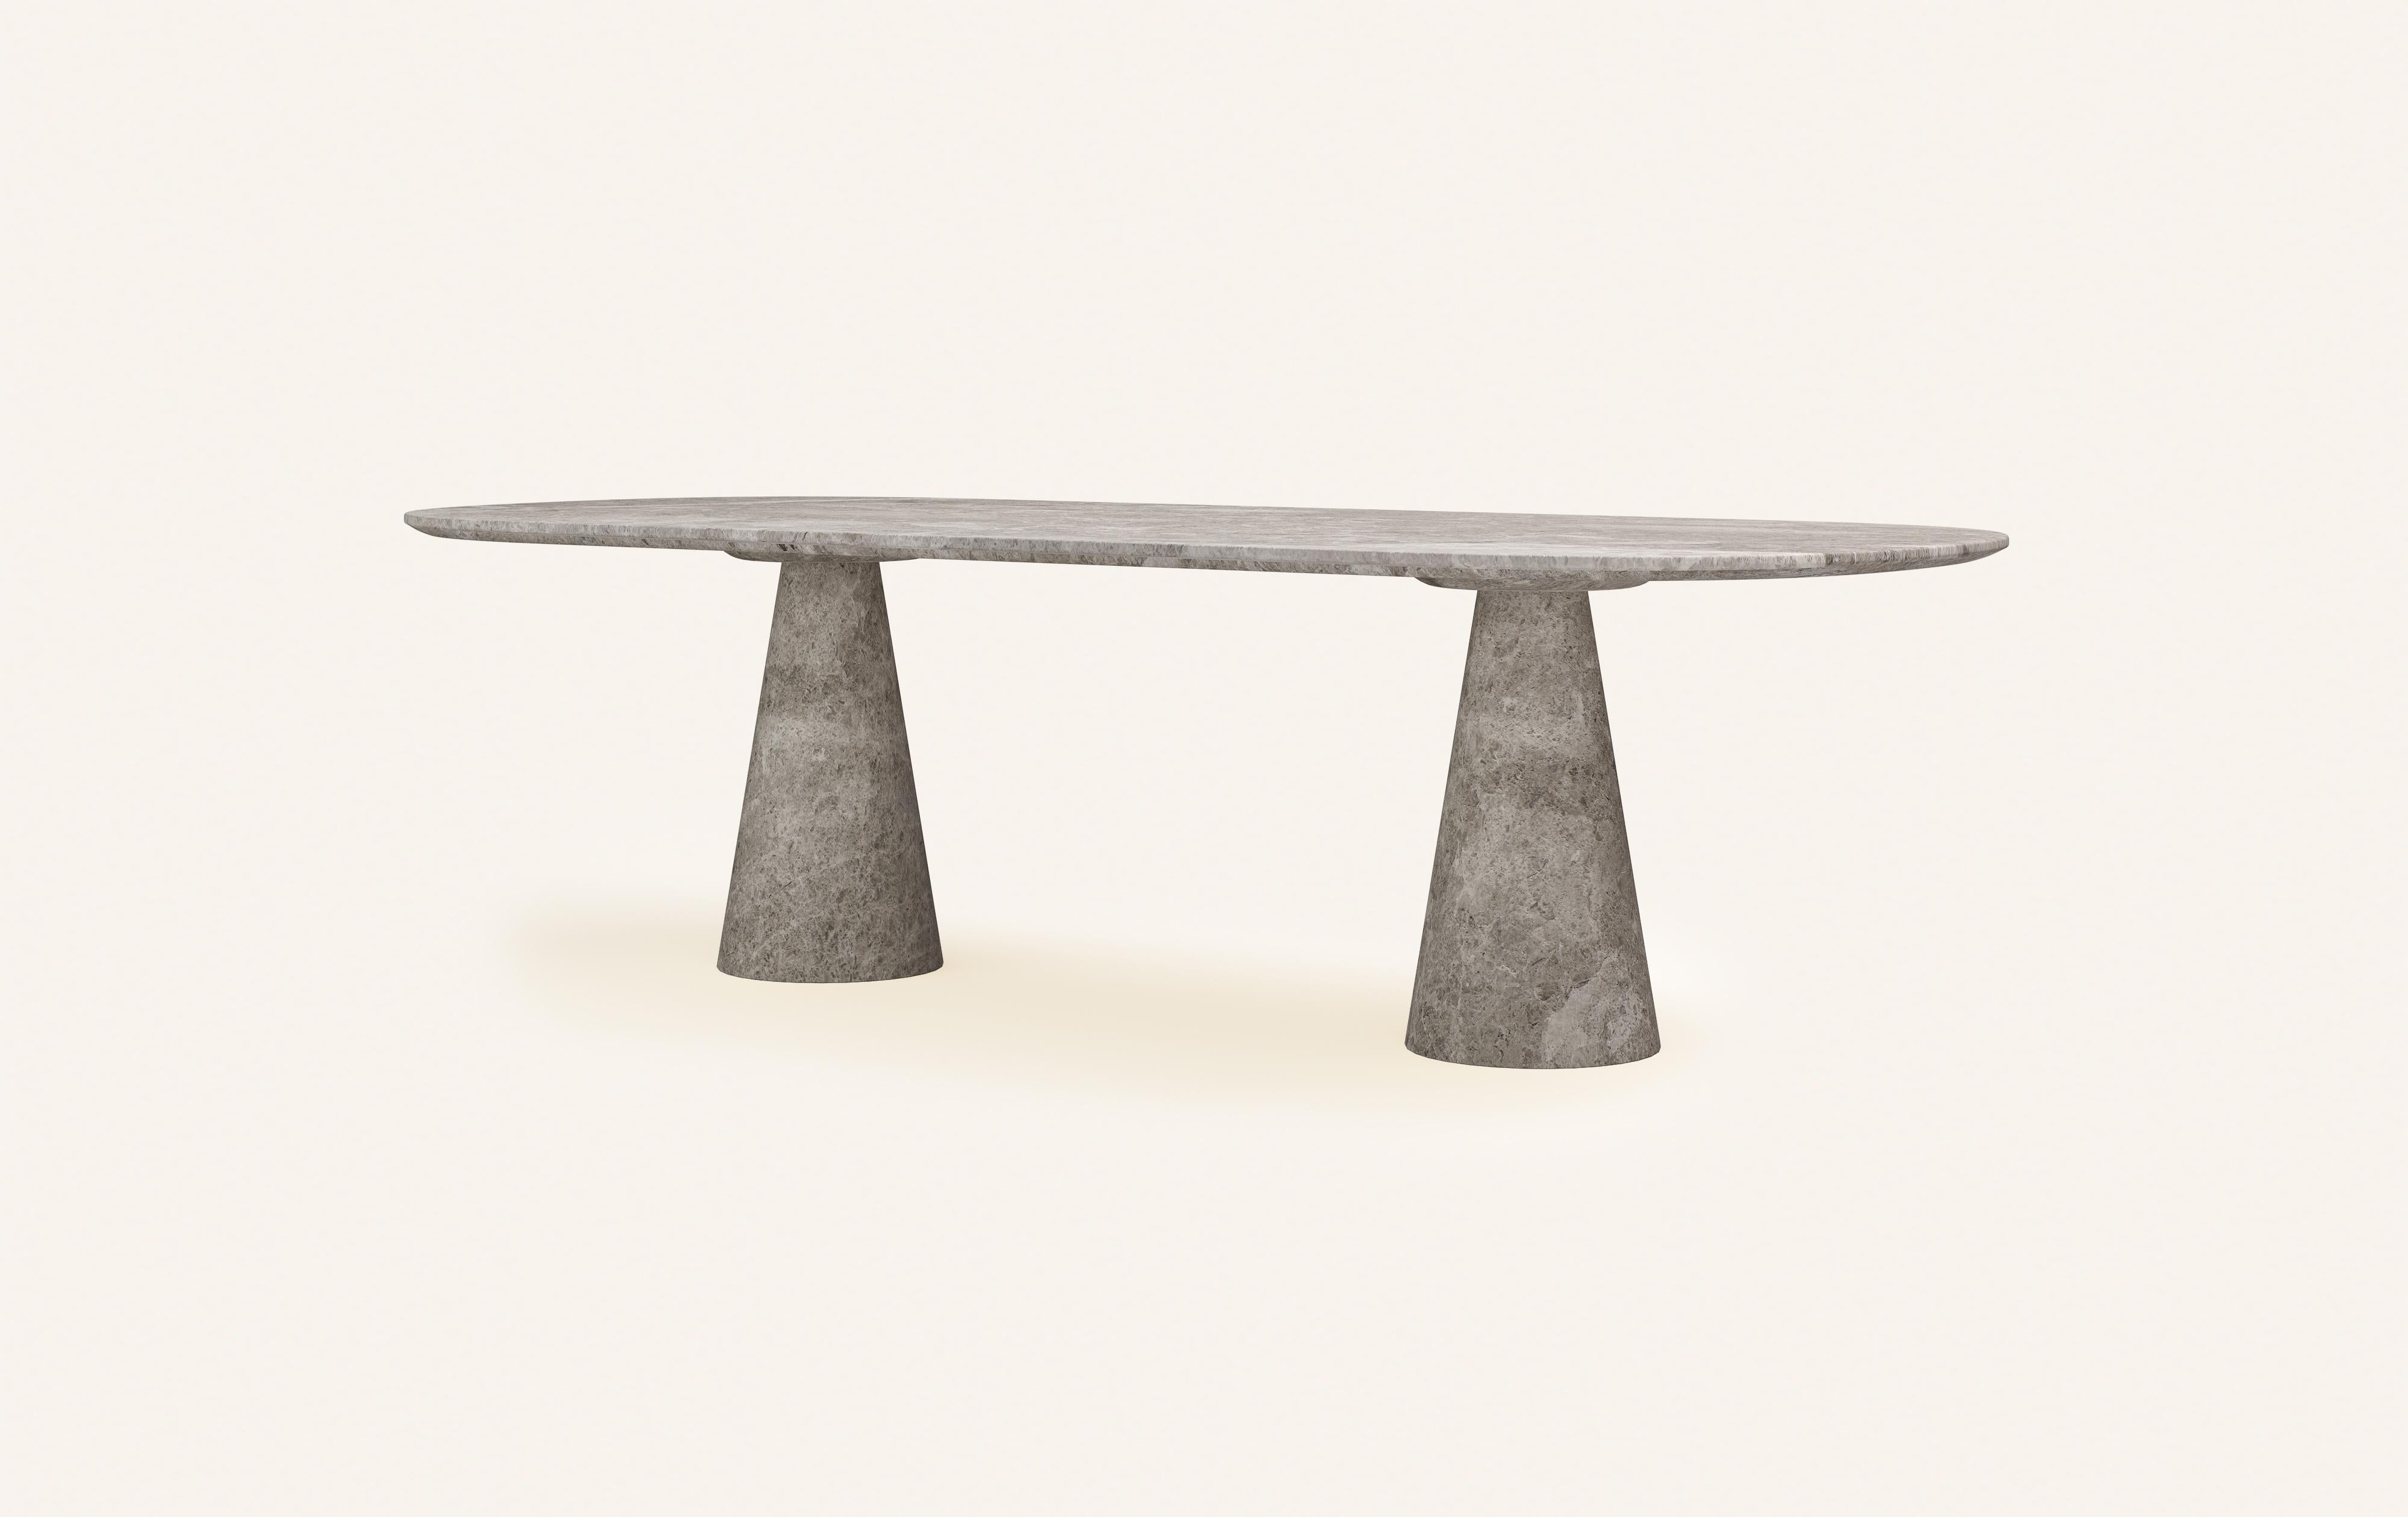 Organic Modern FORM(LA) Cono Oval Dining Table 84”L x 42”W x 30”H Tundra Gray Marble For Sale